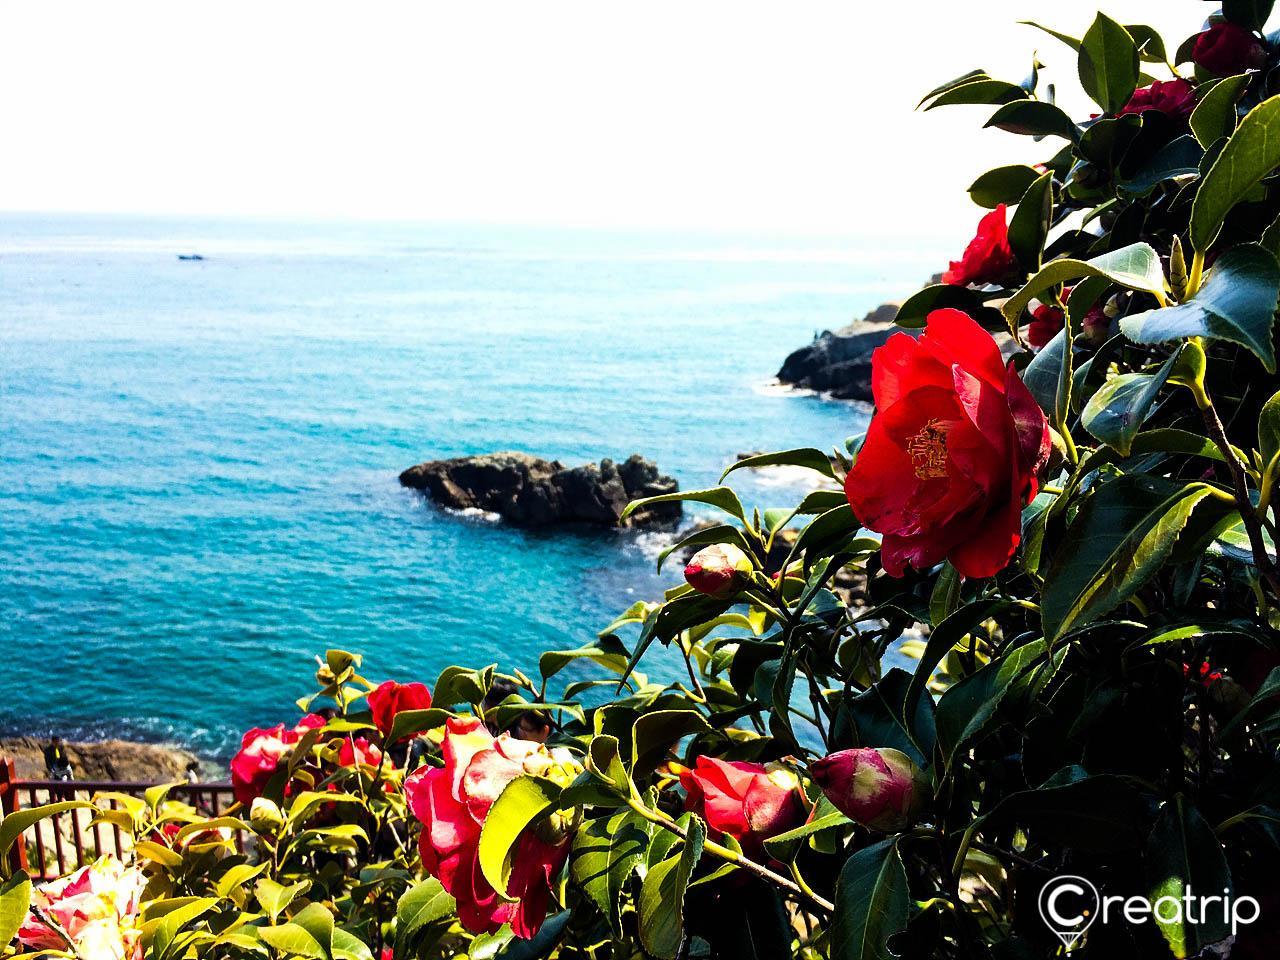 Scenic sunrise view of Haedong Yonggungsa Temple in Busan, Korea featuring water, flowers, plants, and a natural landscape.